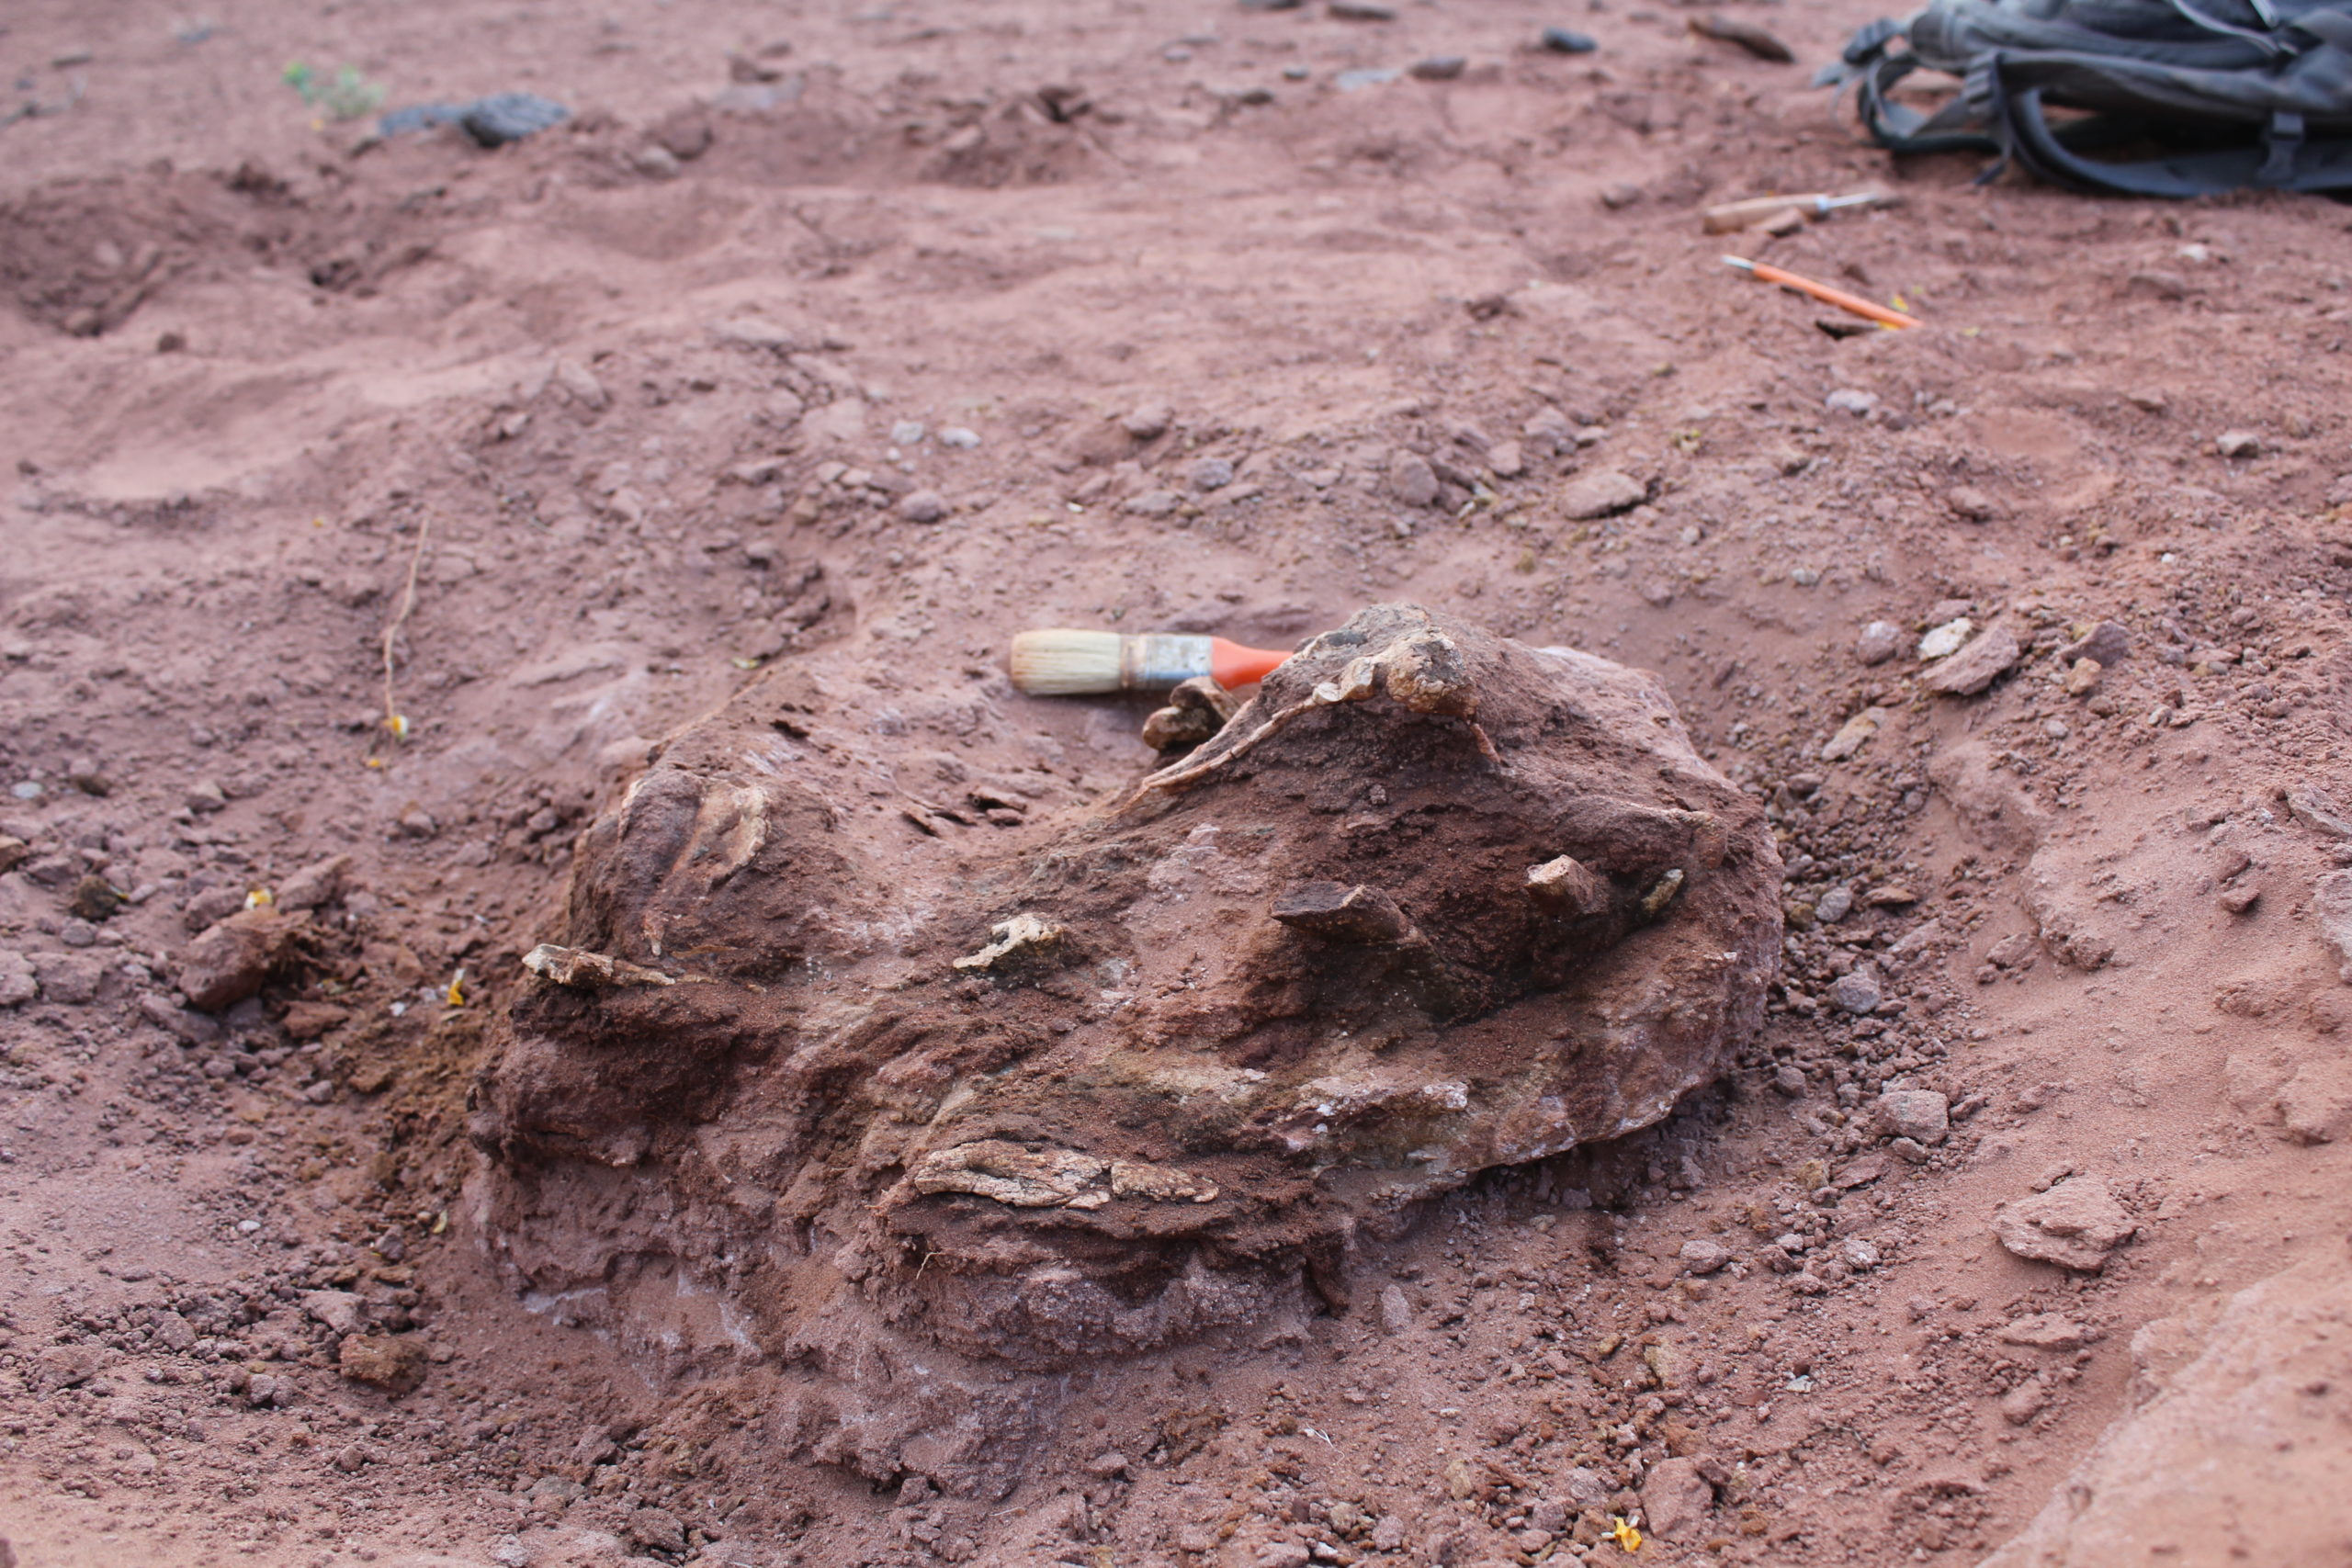 The dinosaur fossil came out of the ground in western Argentina. (Image: Federico Gianechini)